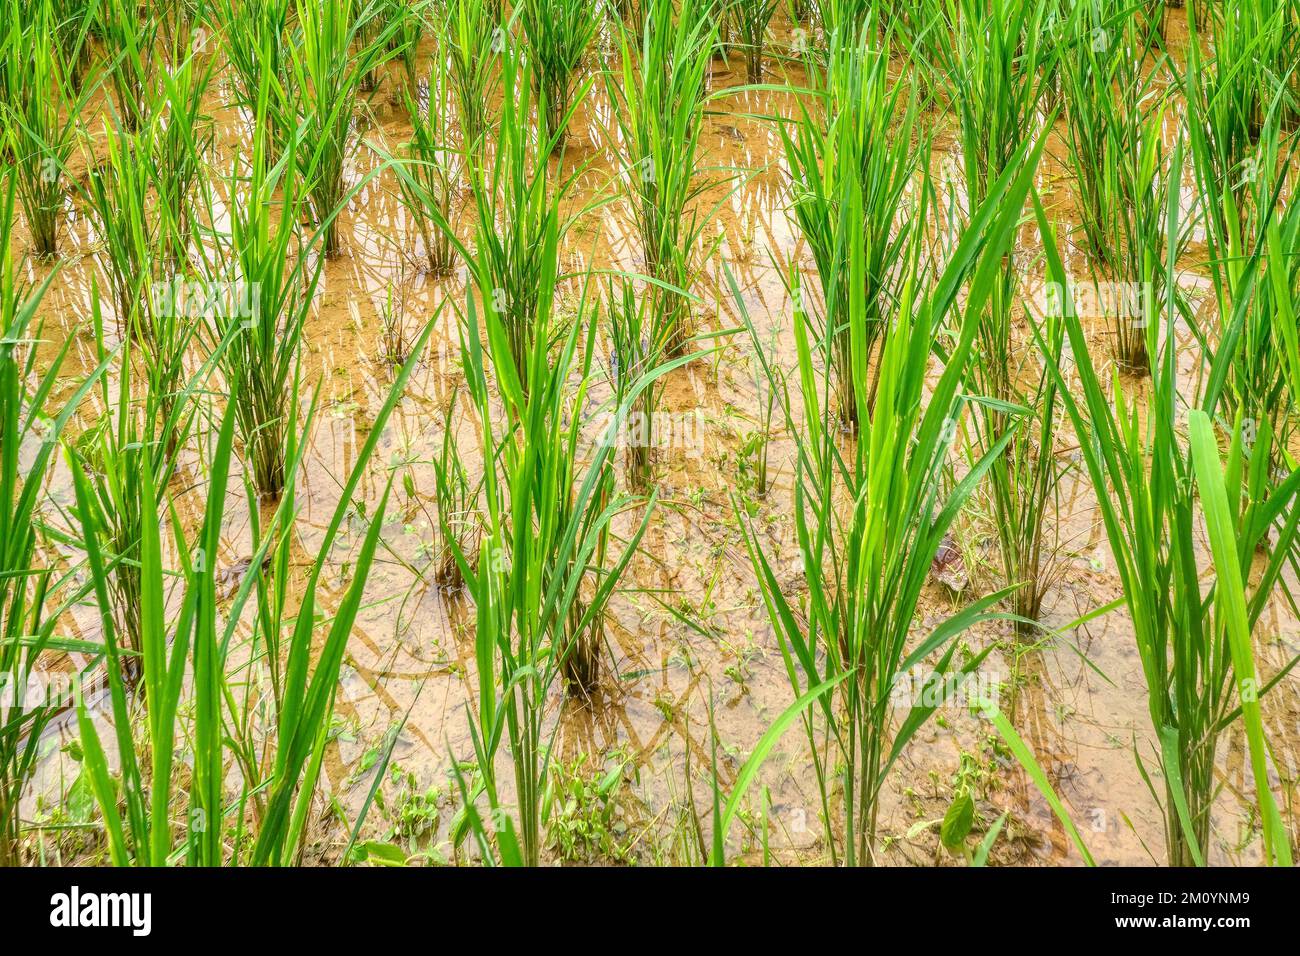 Focus on middle to rear leaves of a crop of healthy rice plants growing in a wet paddy on Mindoro Island, Philippines. Stock Photo